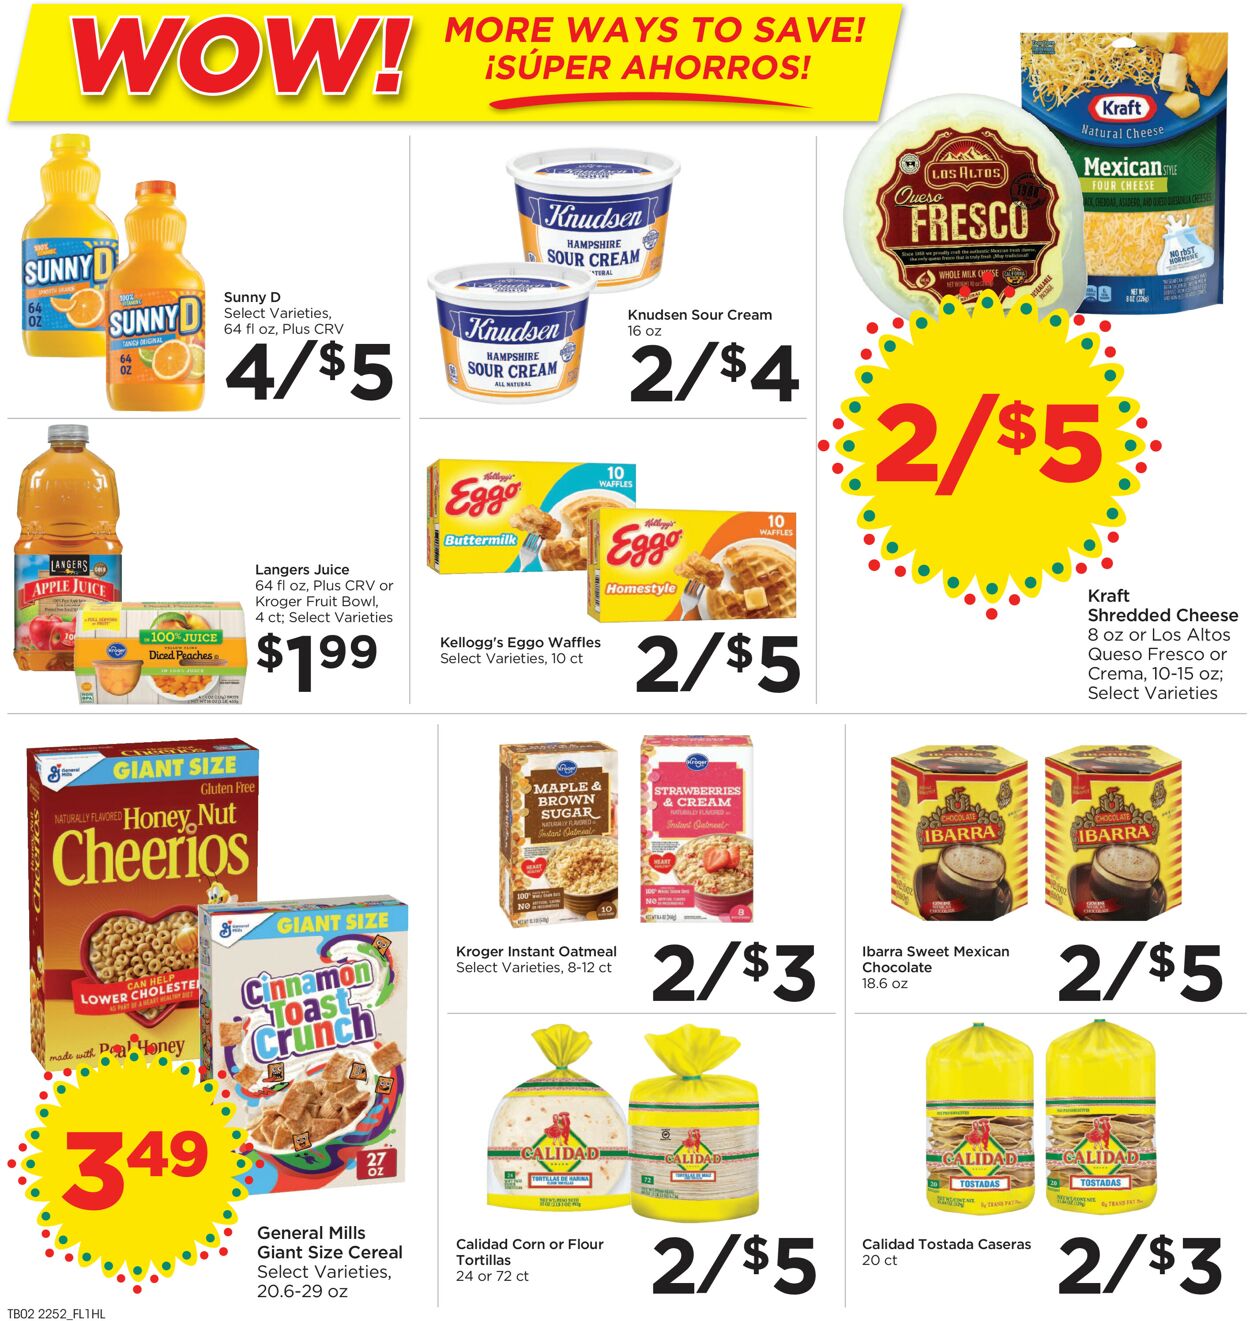 Catalogue Food 4 Less from 01/25/2023